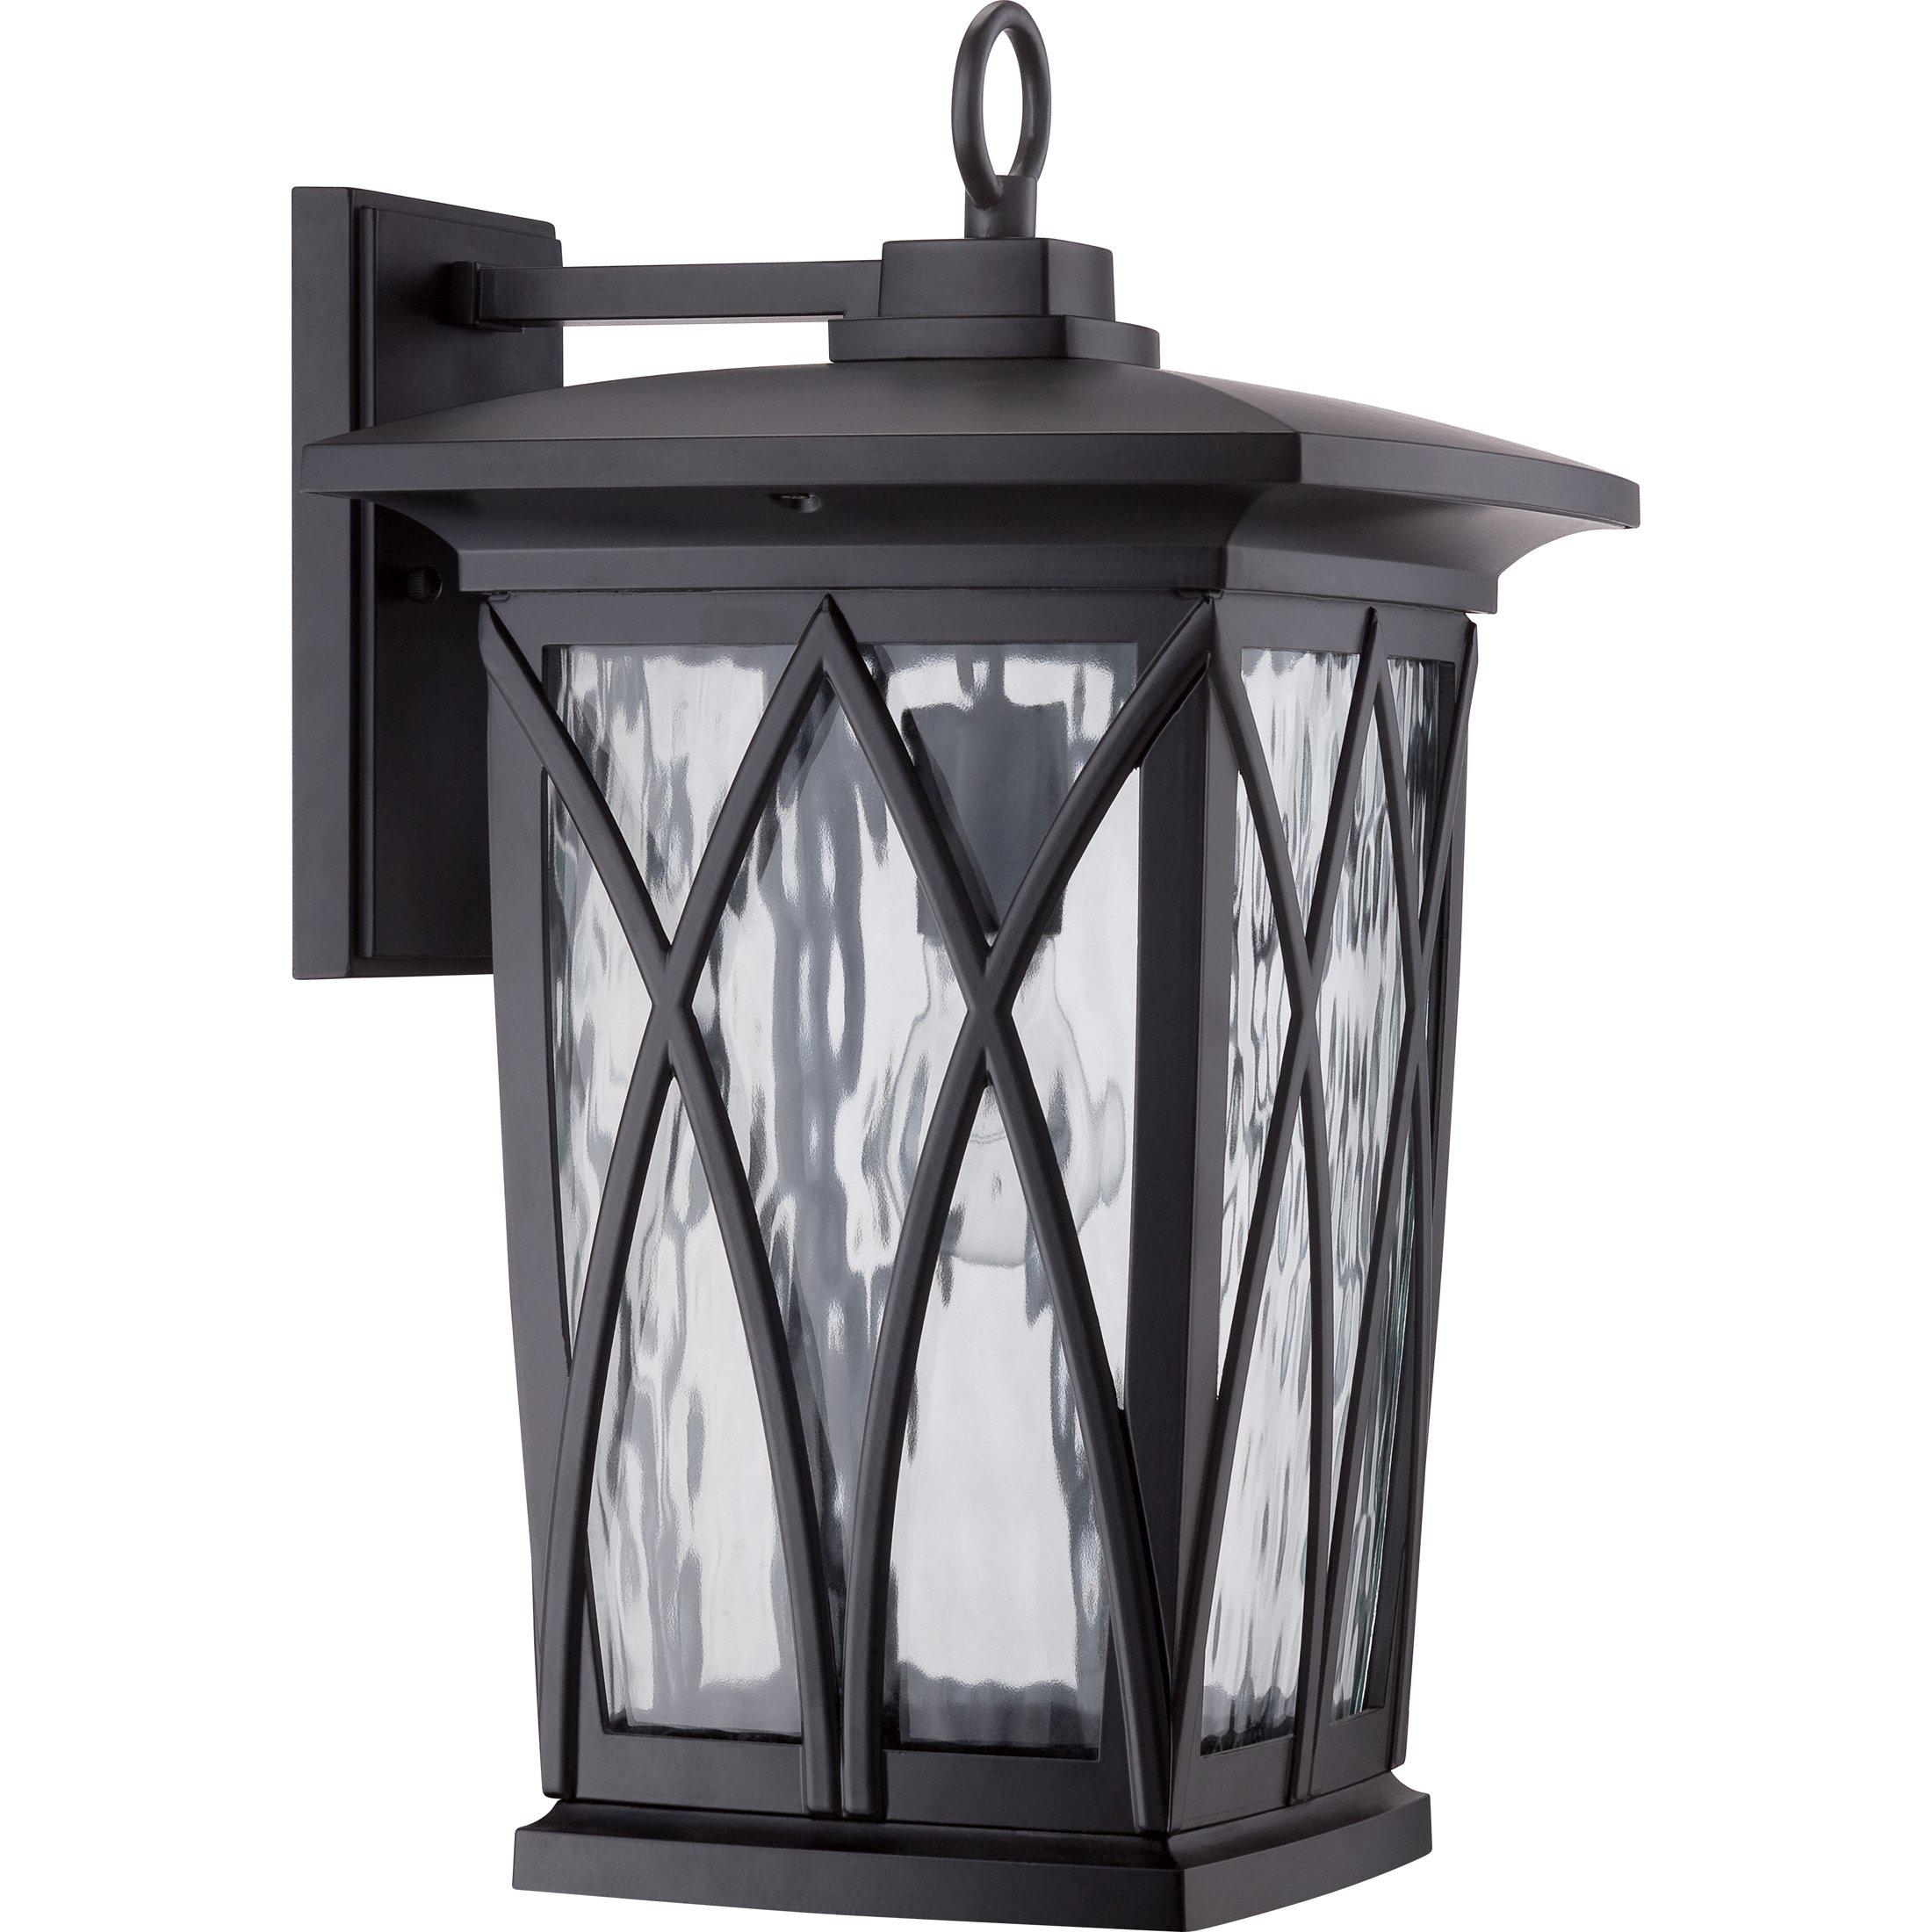 Quoizel  Grover Outdoor Lantern, Large Outdoor l Wall Quoizel   